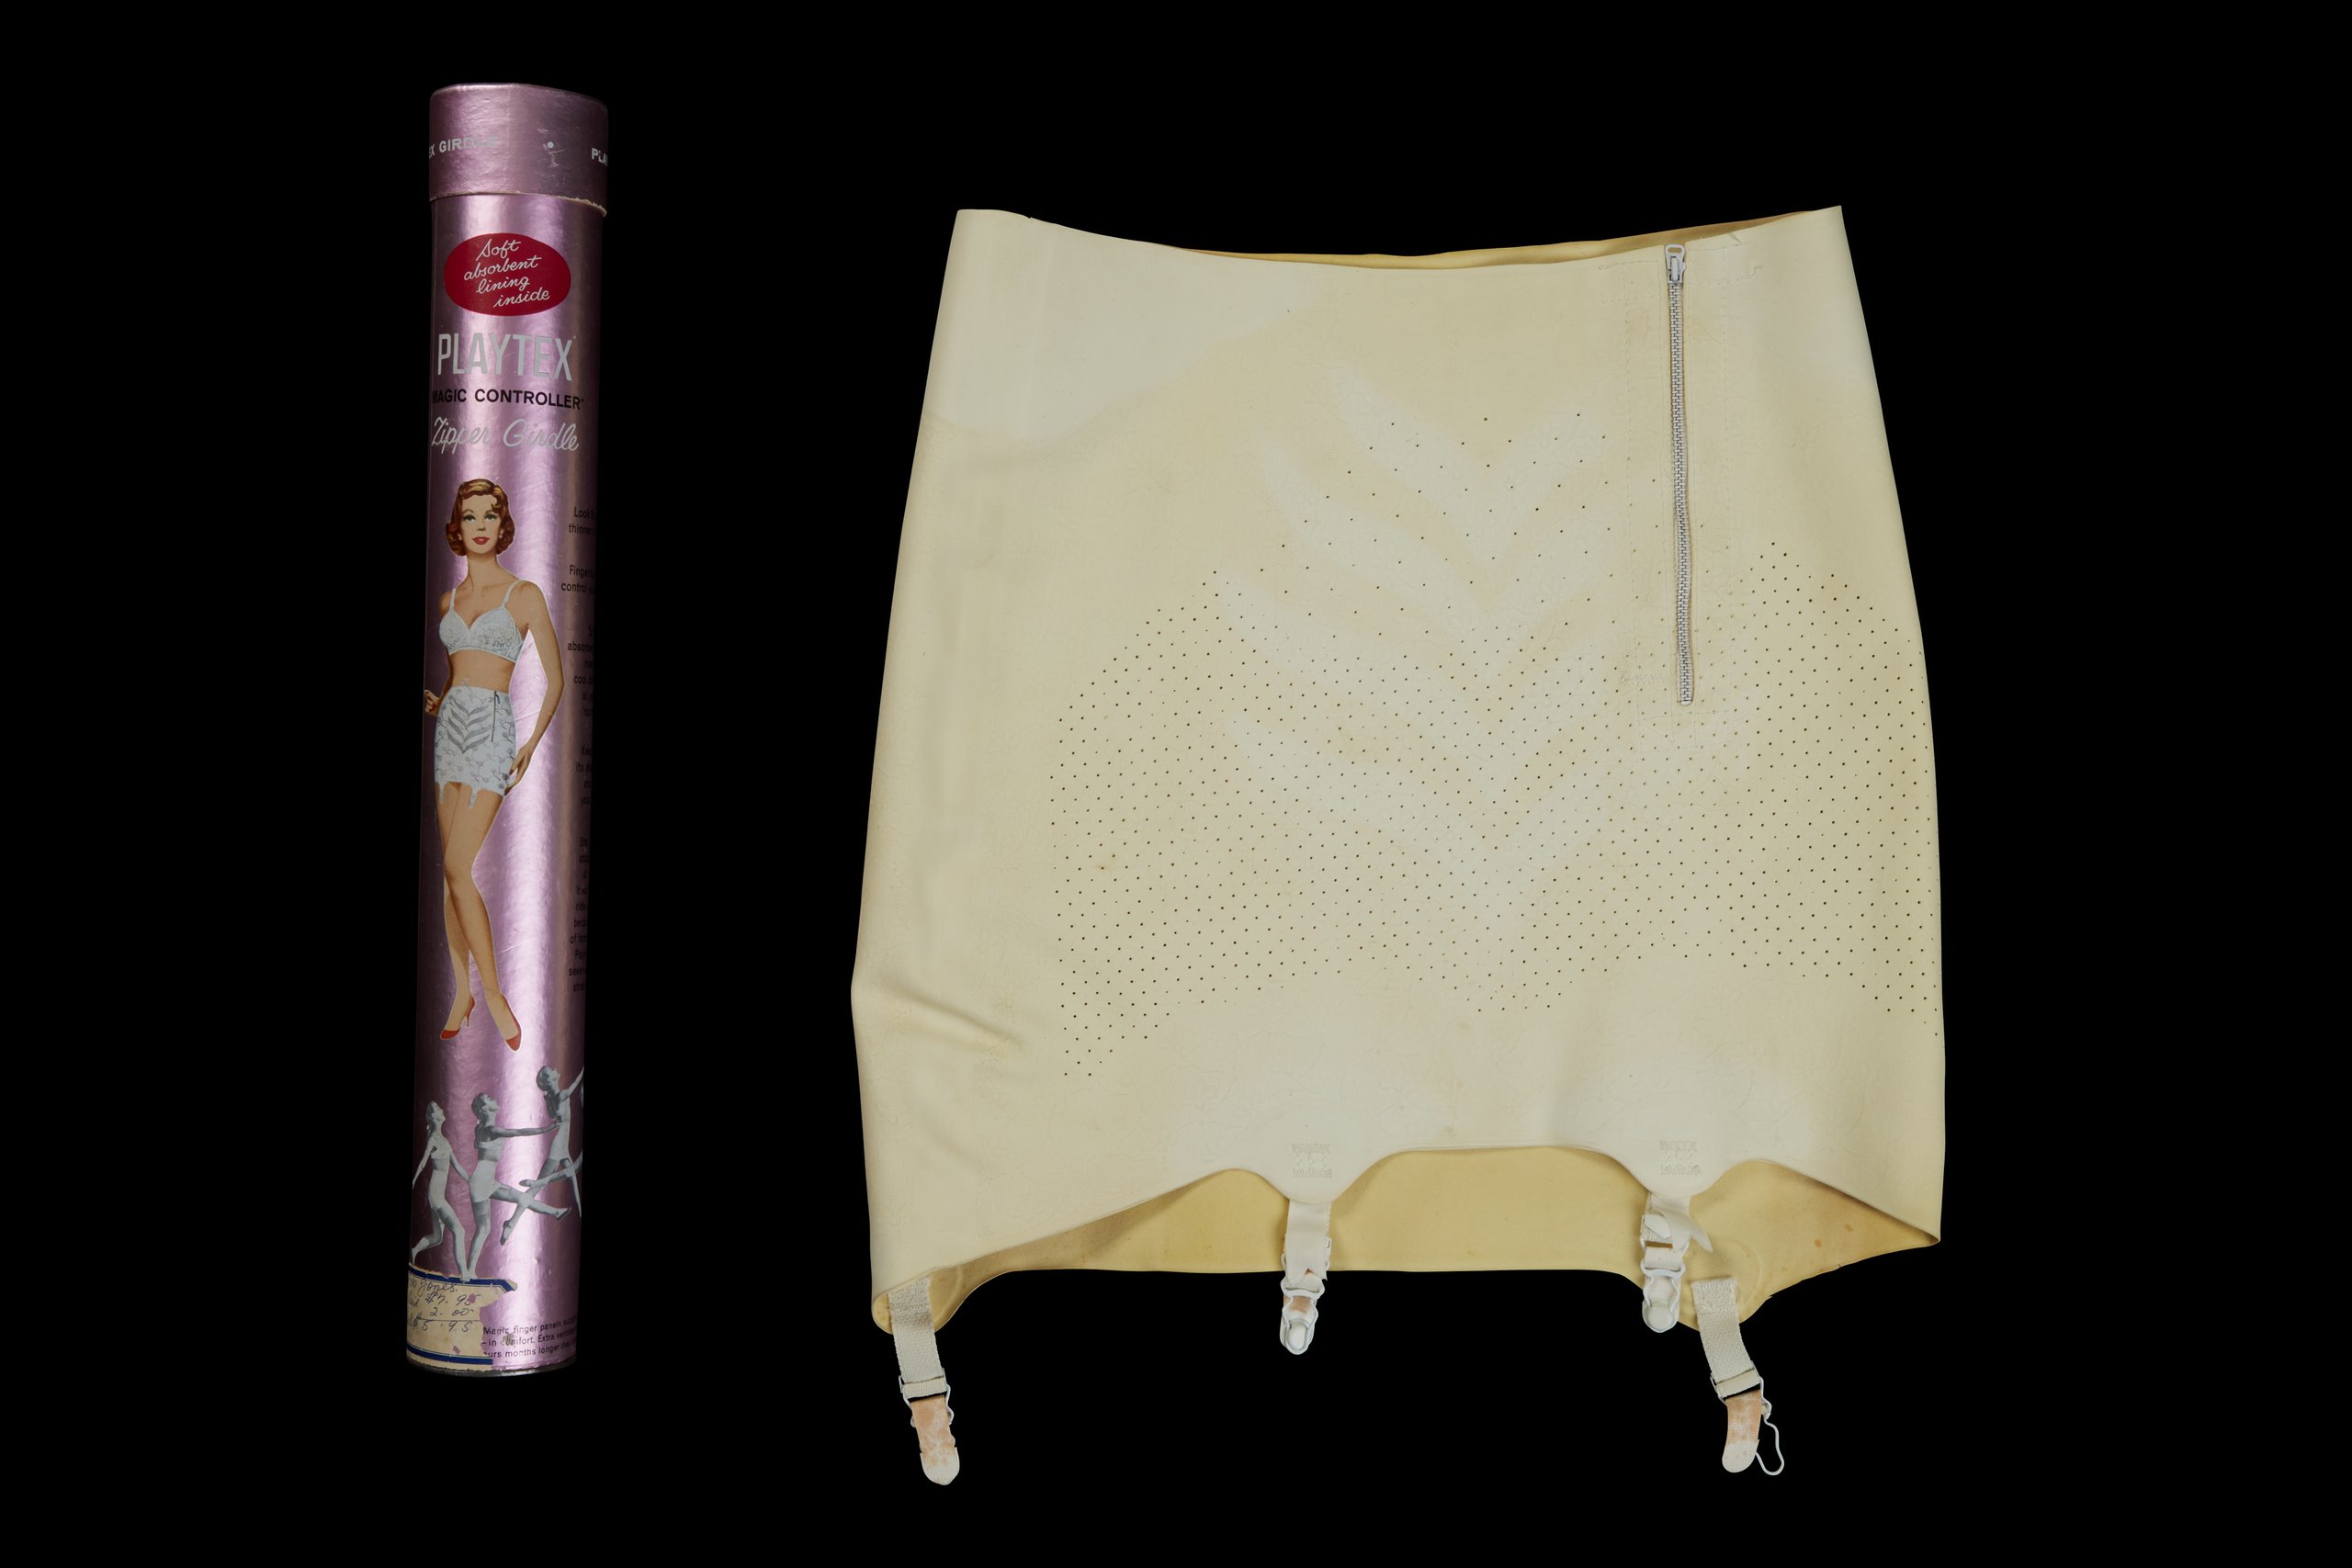 Powerhouse Collection - Womens 'Magig Controller' girdle with packaging by  Playtex Ltd